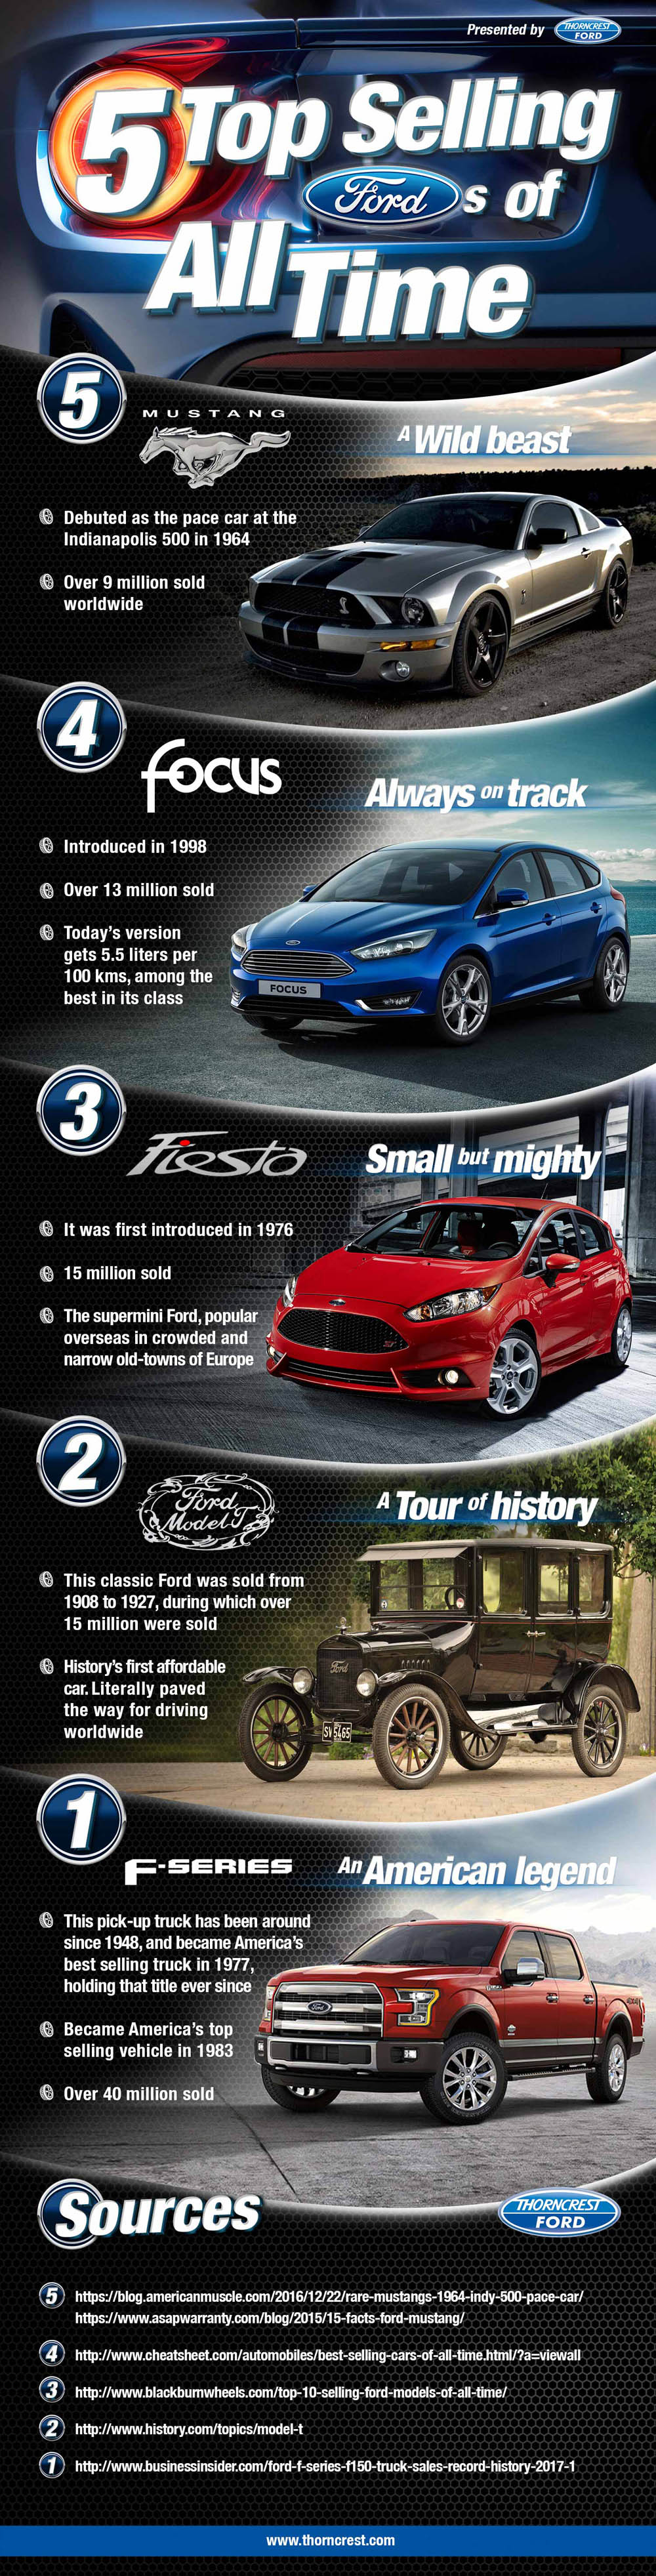 5 Top Selling Fords of All Time